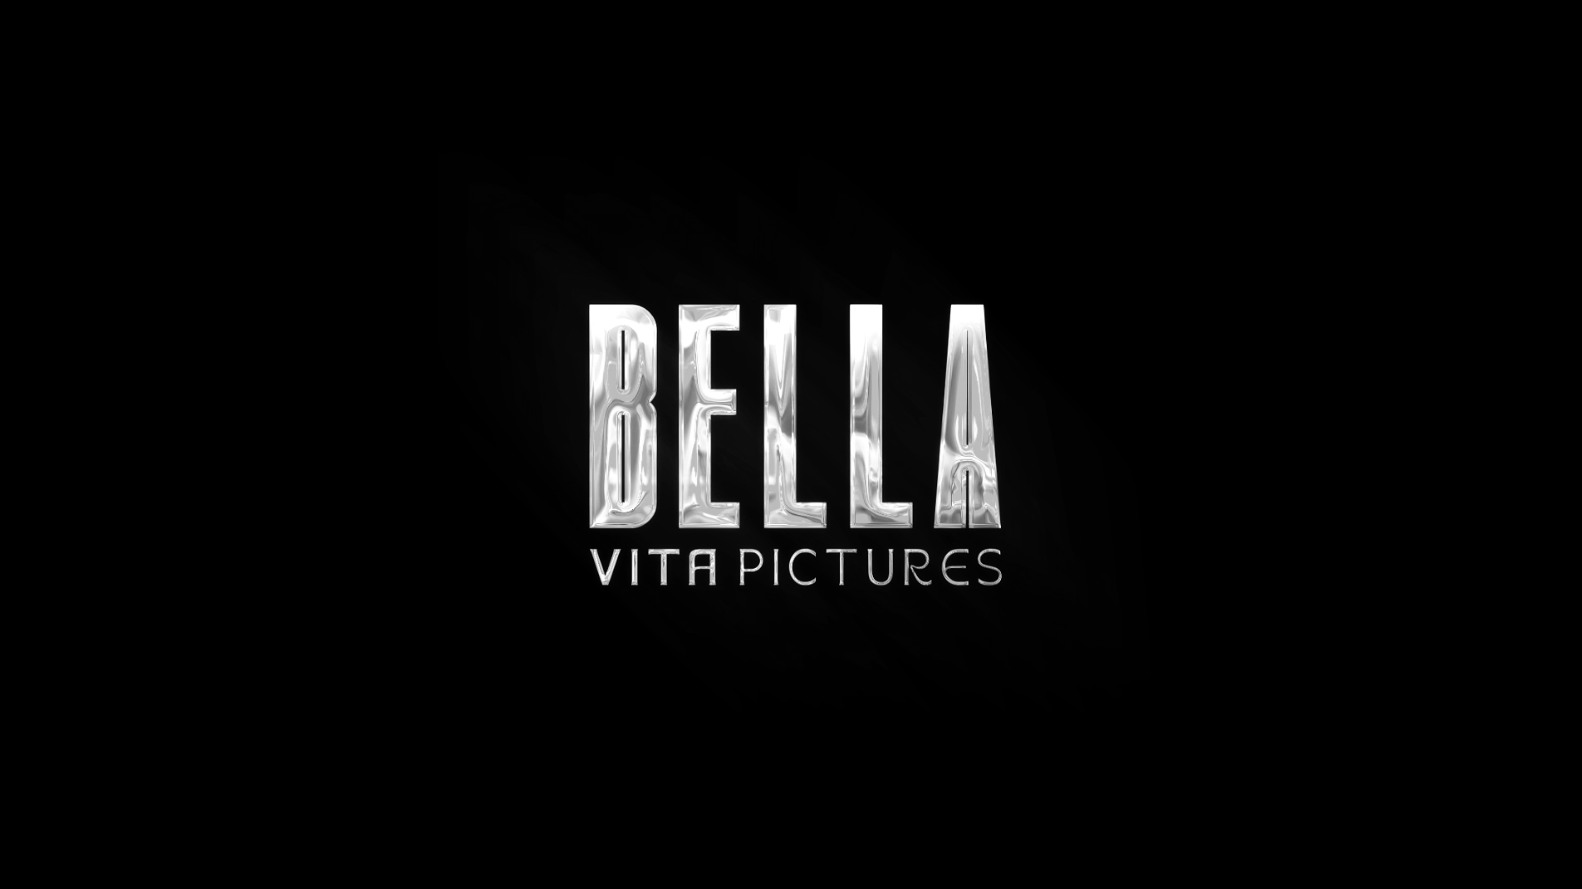 About Us | Bella Vita Pictures